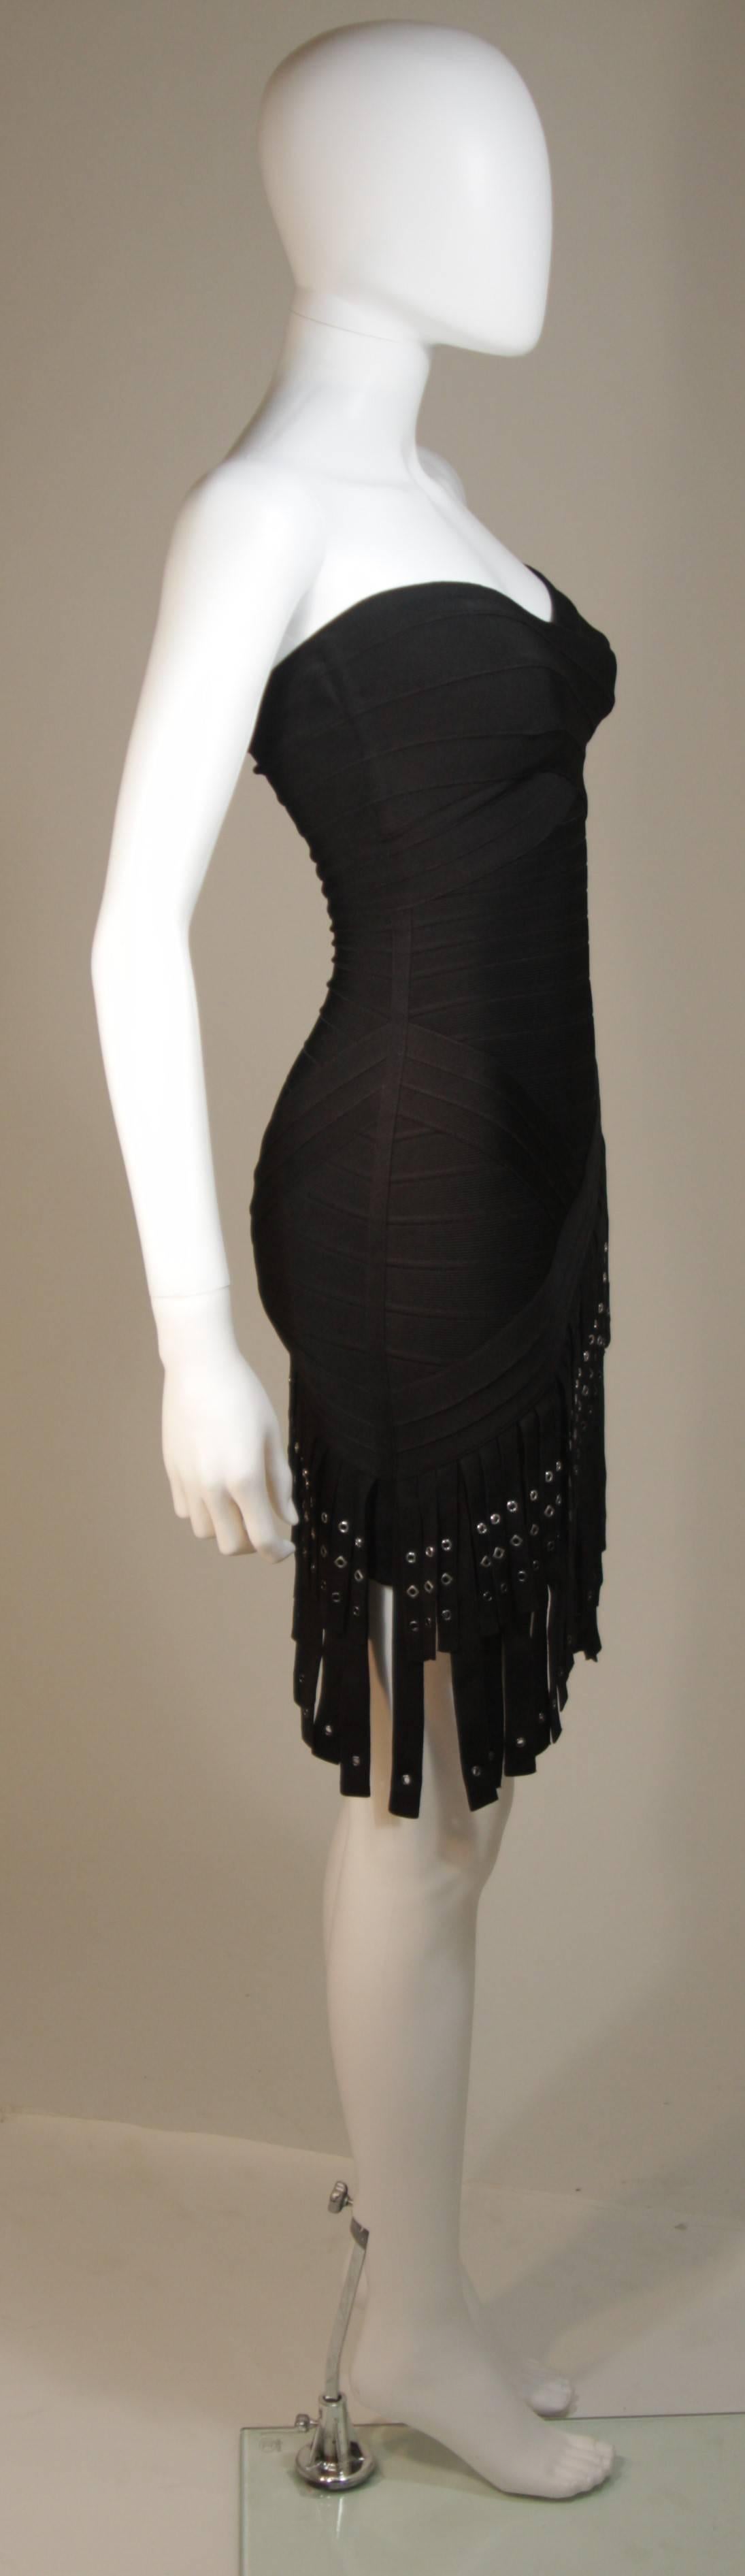 HERVE LEGER Black Bodicon Cocktail Dress with Gromets and Fringe Size XS 1